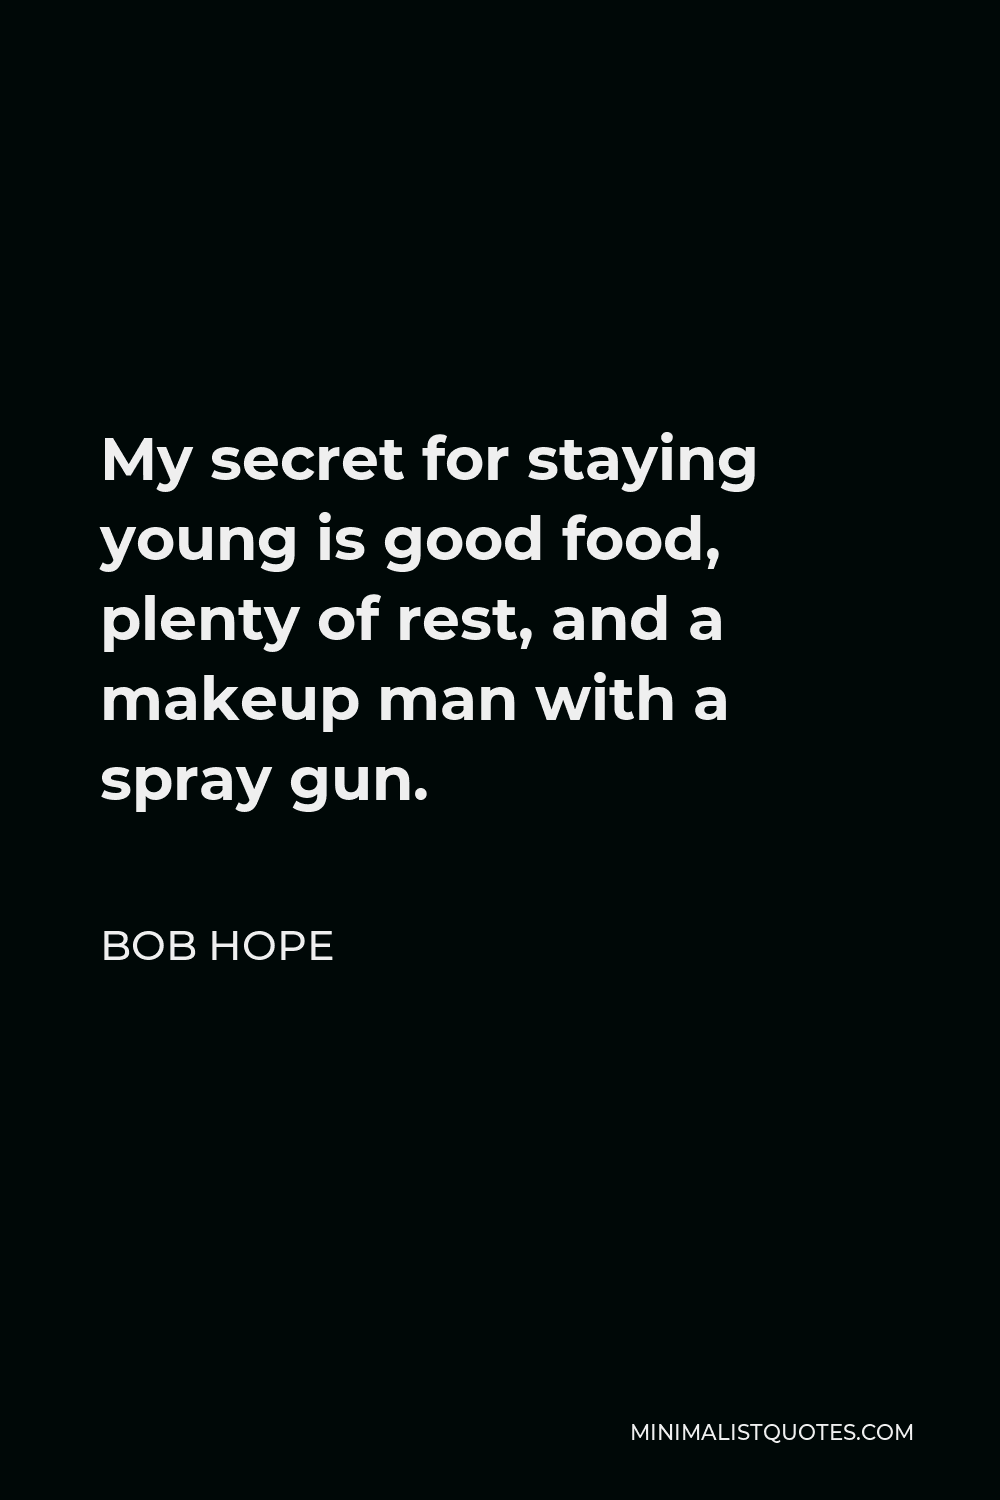 Bob Hope Quote - My secret for staying young is good food, plenty of rest, and a makeup man with a spray gun.